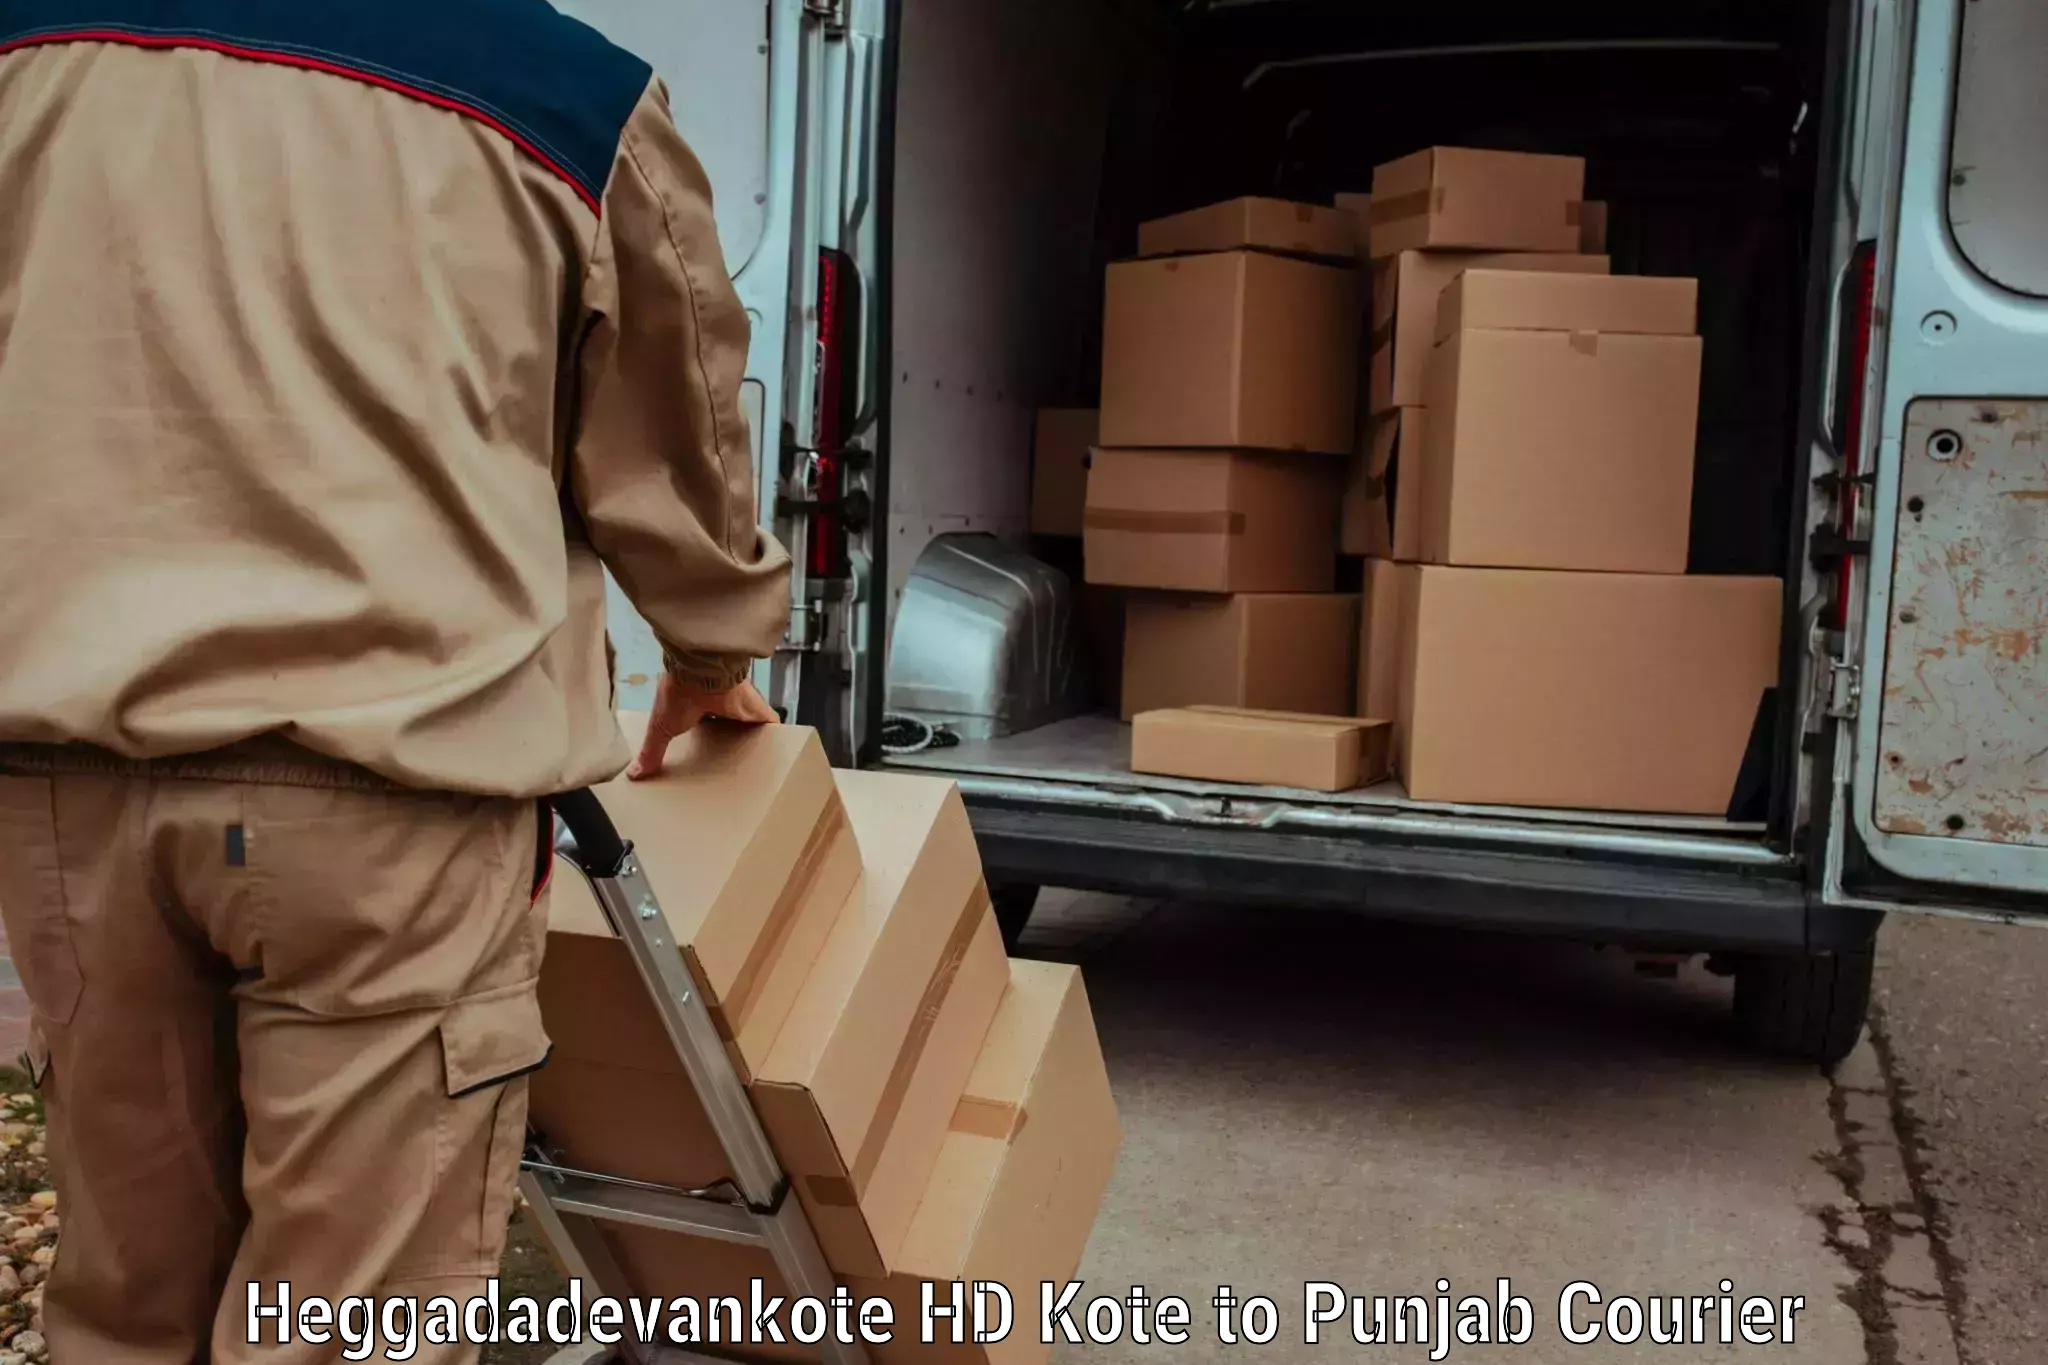 Professional courier services Heggadadevankote HD Kote to IIT Ropar